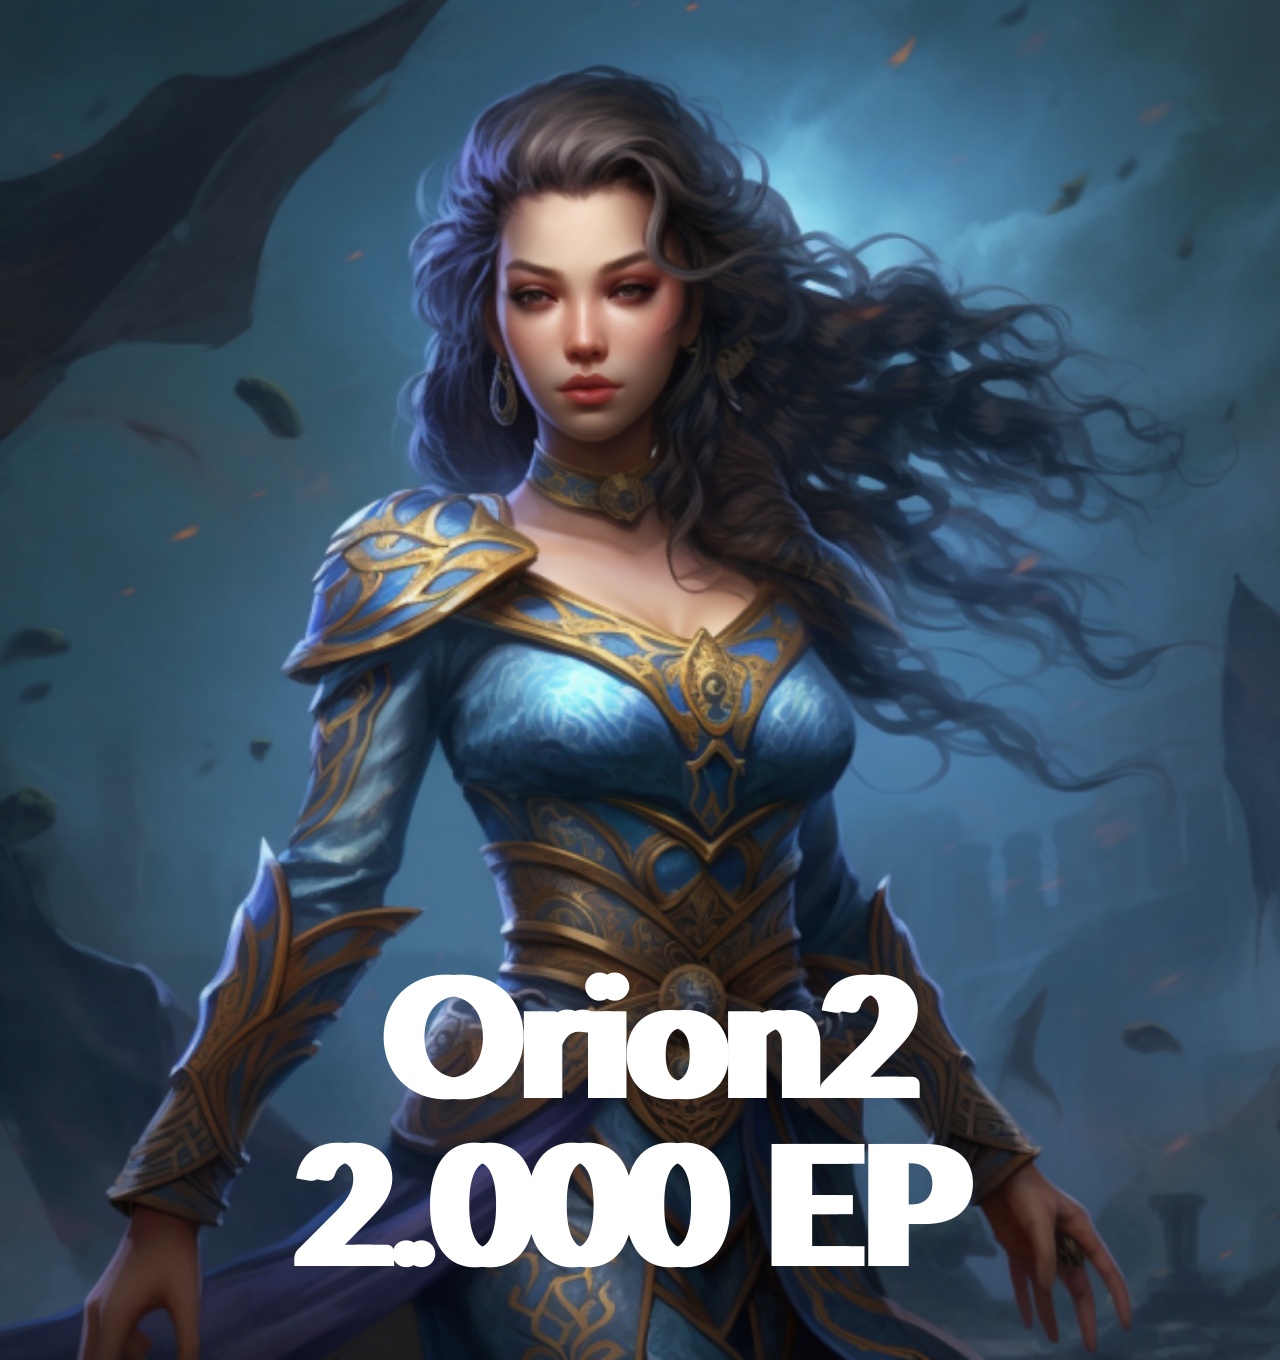 Orion2 2.000 EP